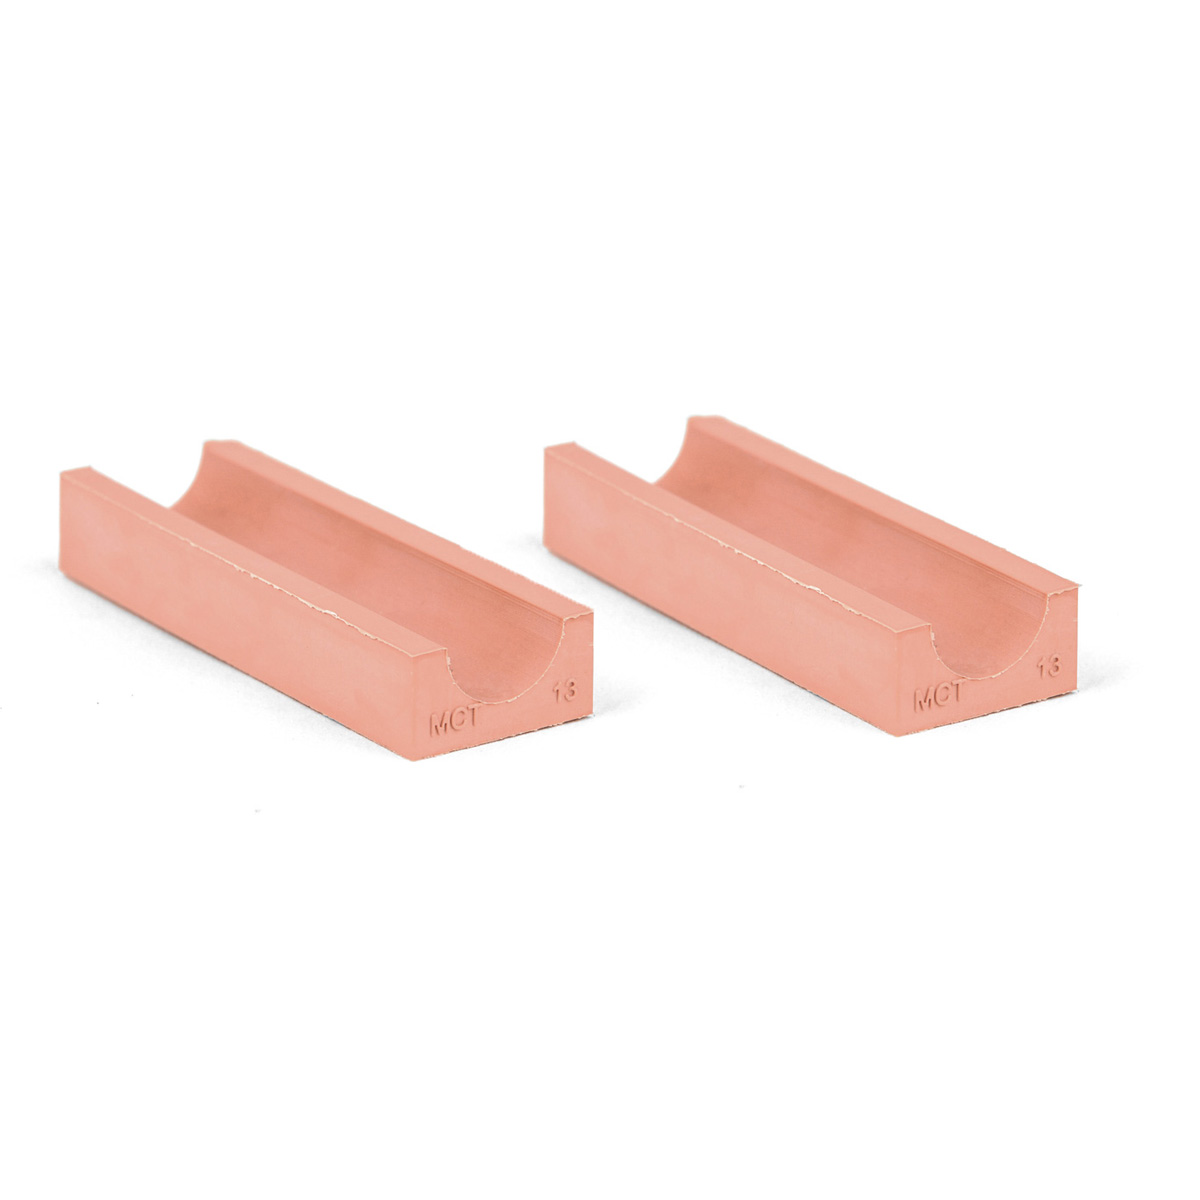 20-13*2 Set of 2 half insert block lycron, 20-13 for cable/pipe diam. 12.5-13.5mm